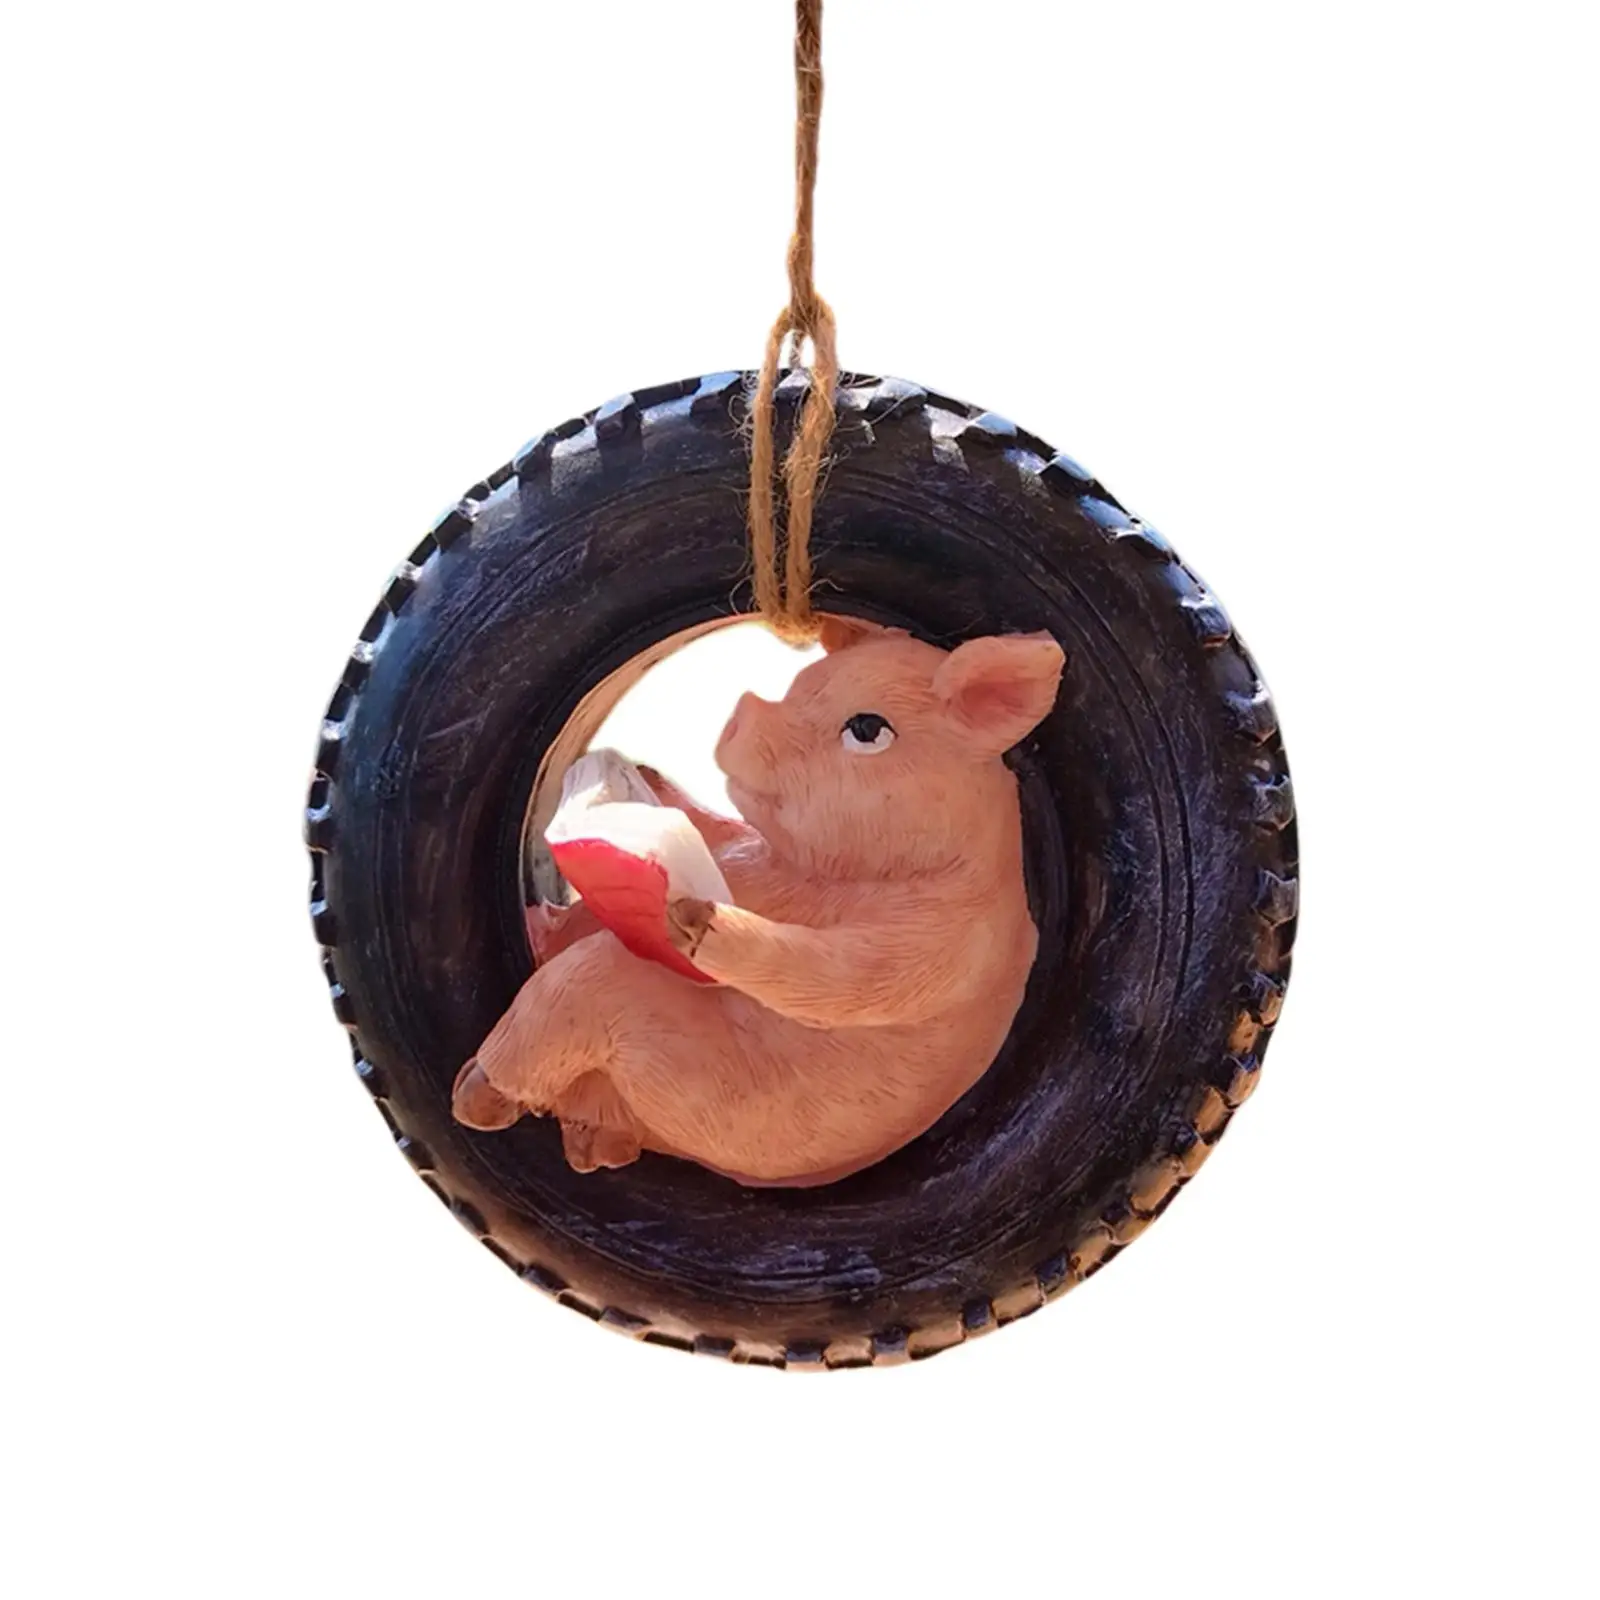 Decorations Resin Hanger Hanging Pig Sculpture Pig Statues Outdoor Garden Statue Outdoor Decor for Patio Housewarming Gift Lawn